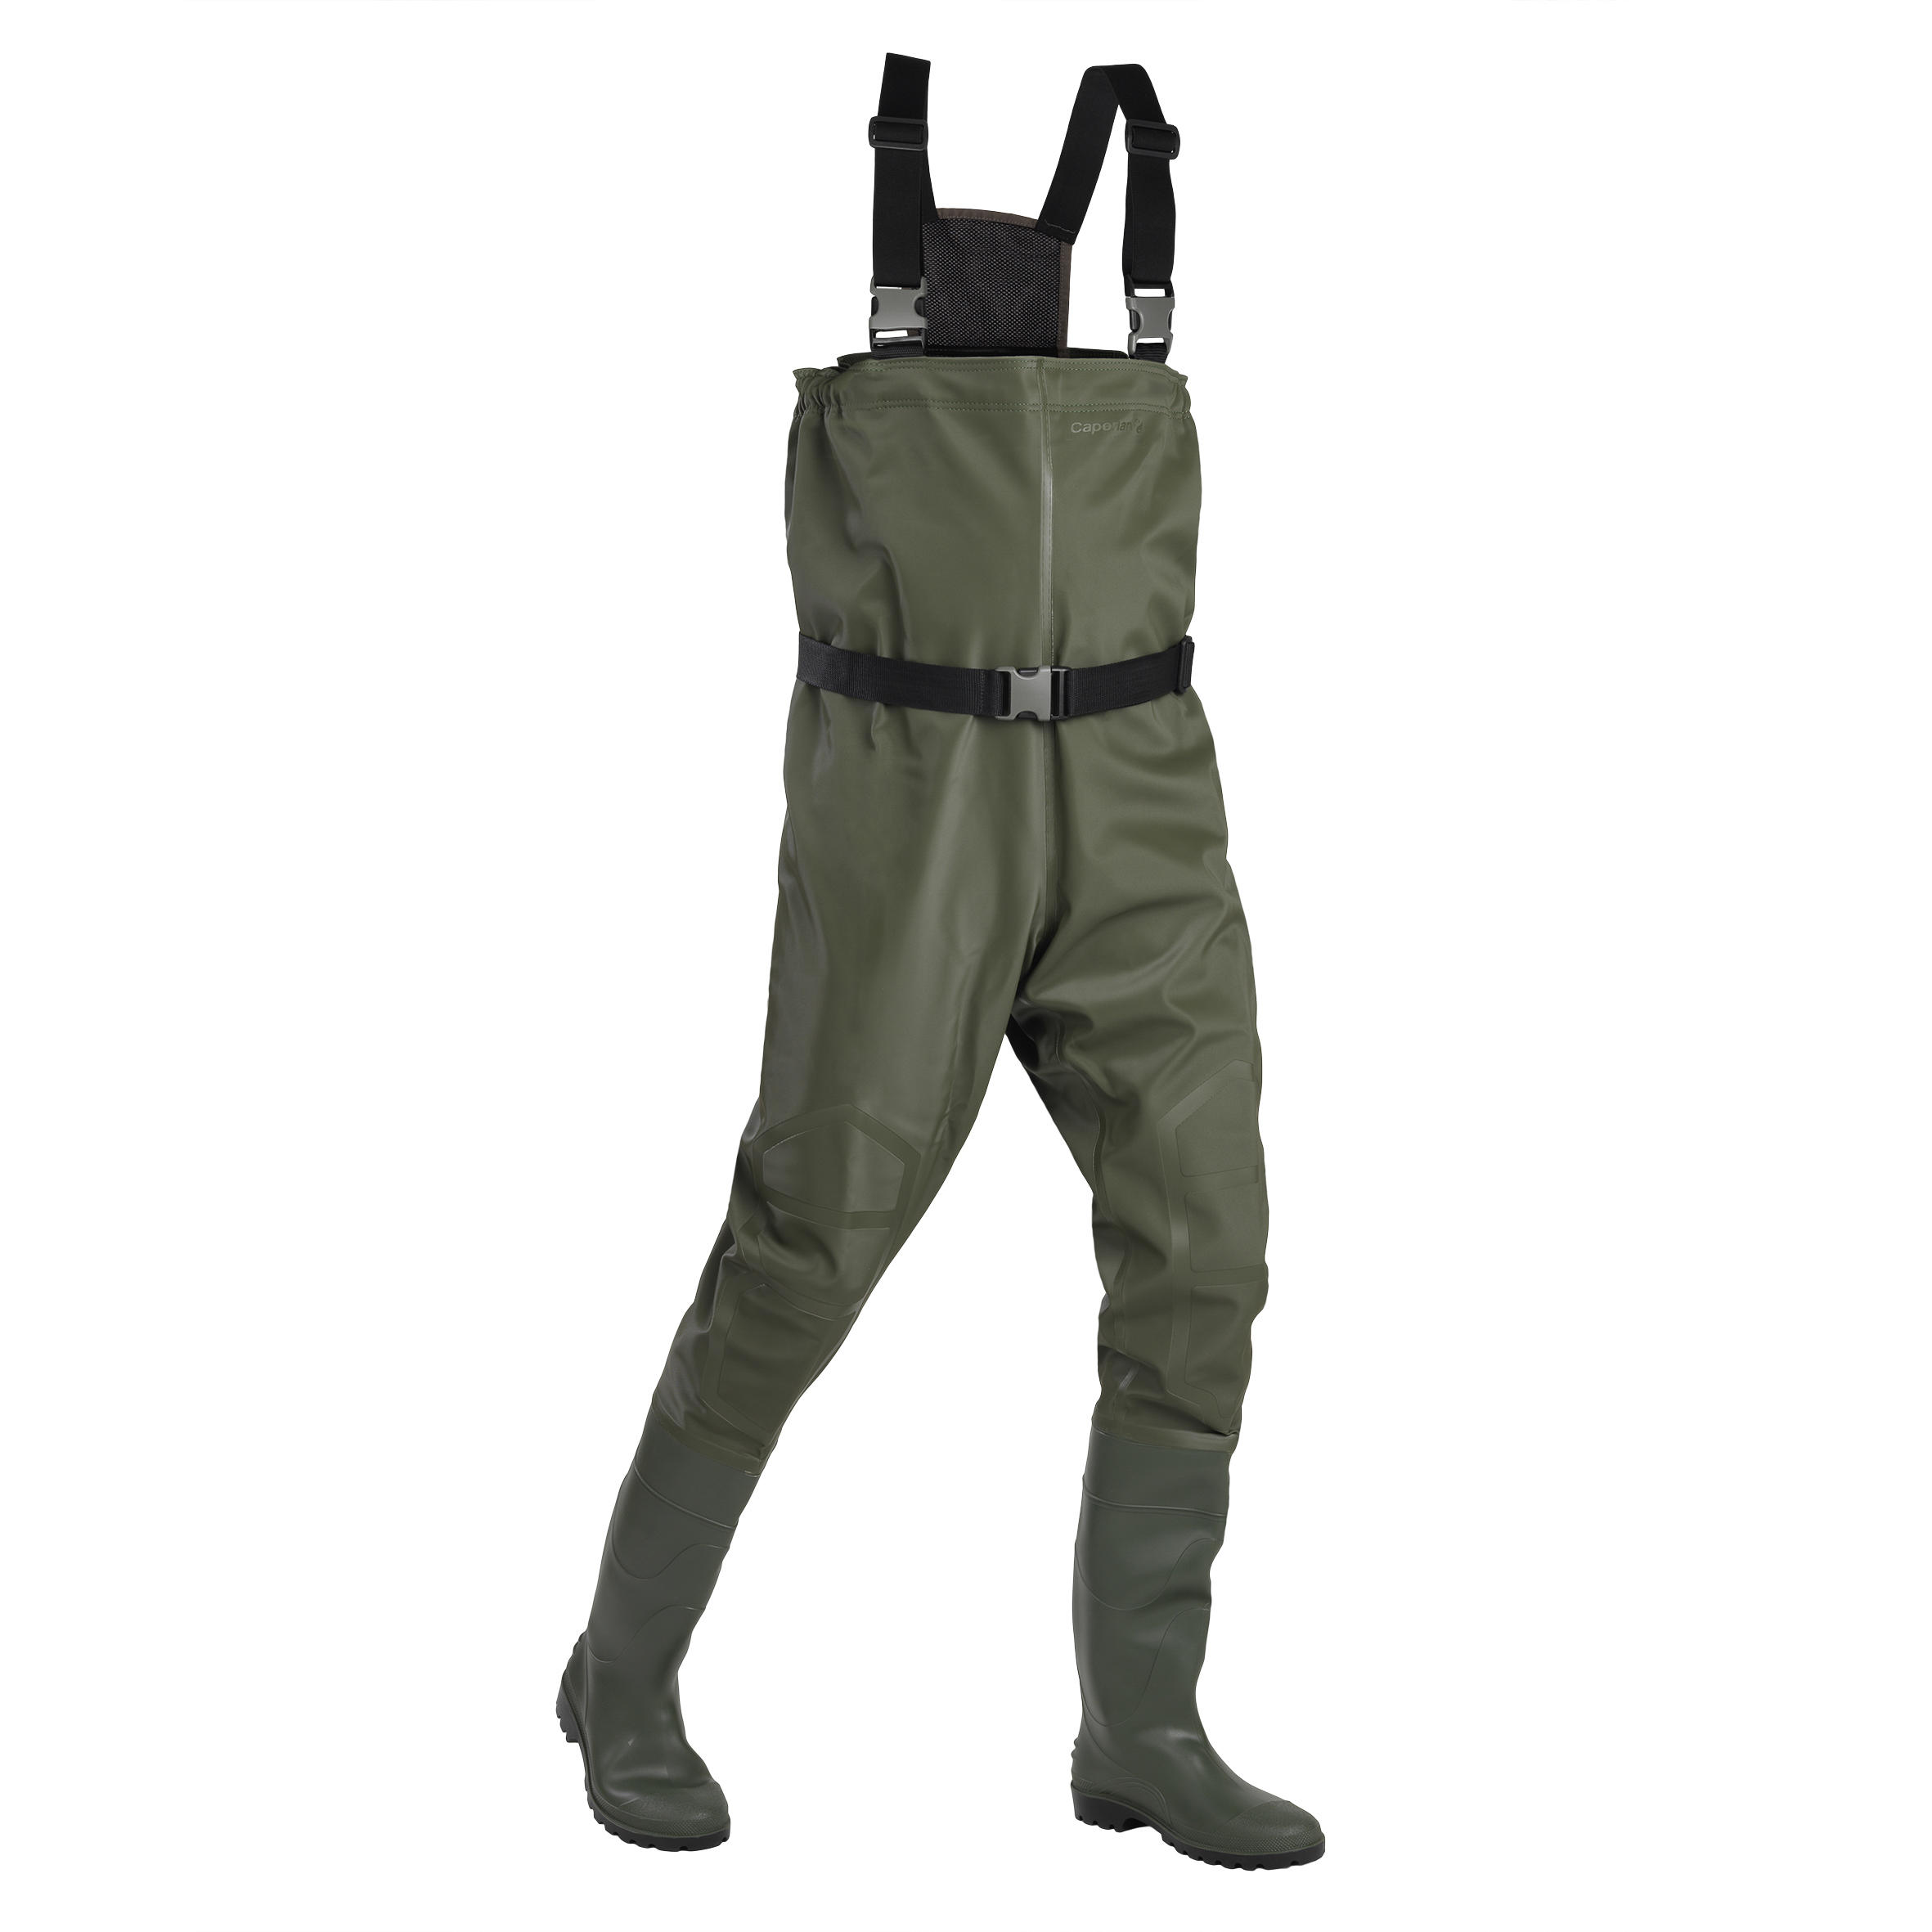 Fishing Waders Thermo Neoprene 3 mm - 500 - Carbon grey - Caperlan